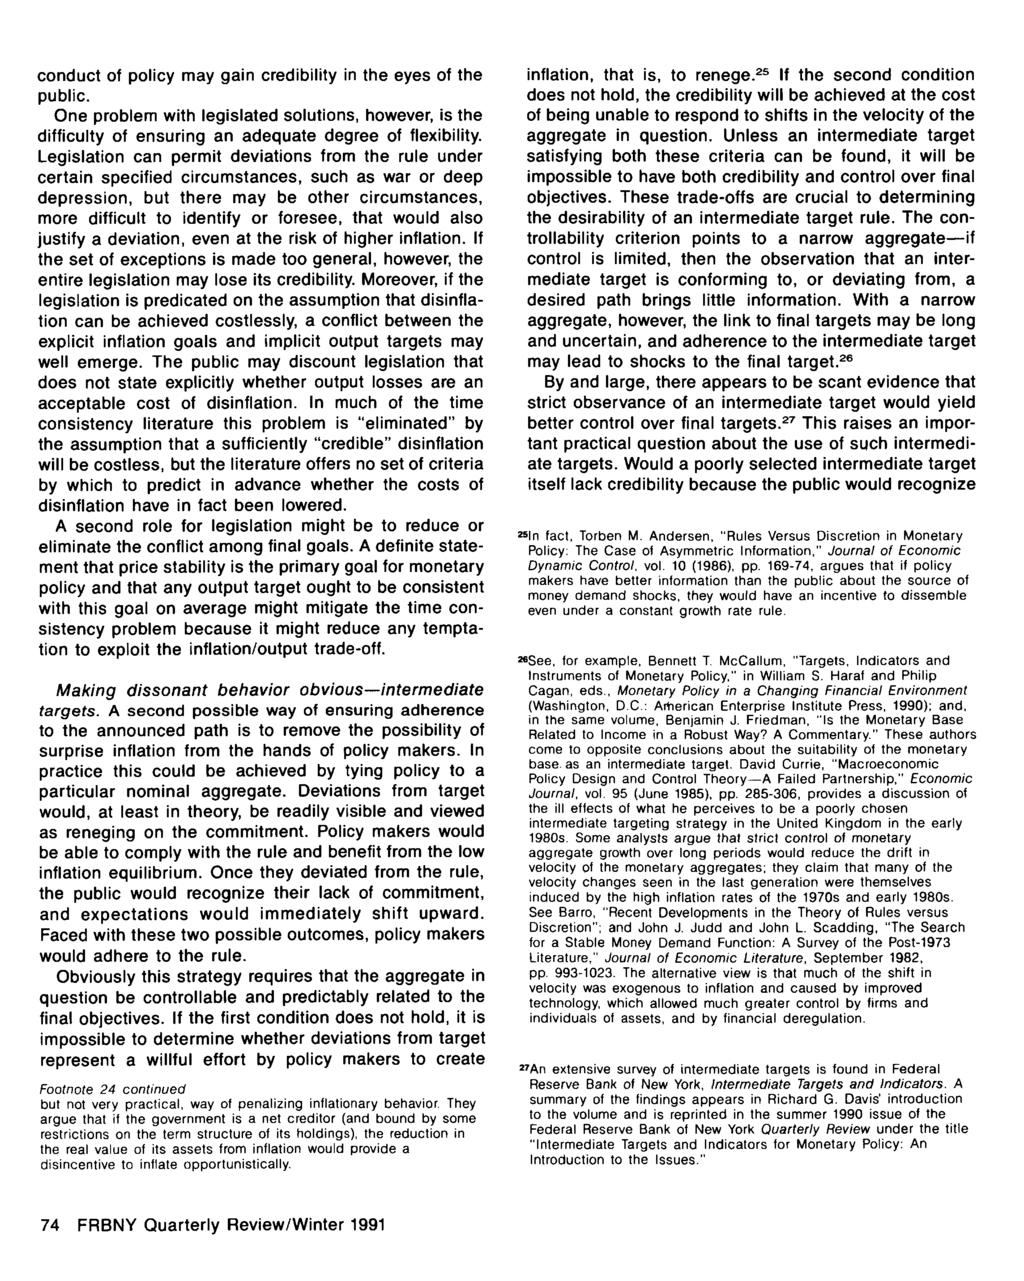 74 FRBNY Quarterly Review/Winter 1991 Winter 1990-1991 conduct of policy may gain credibility in the eyes of the public.